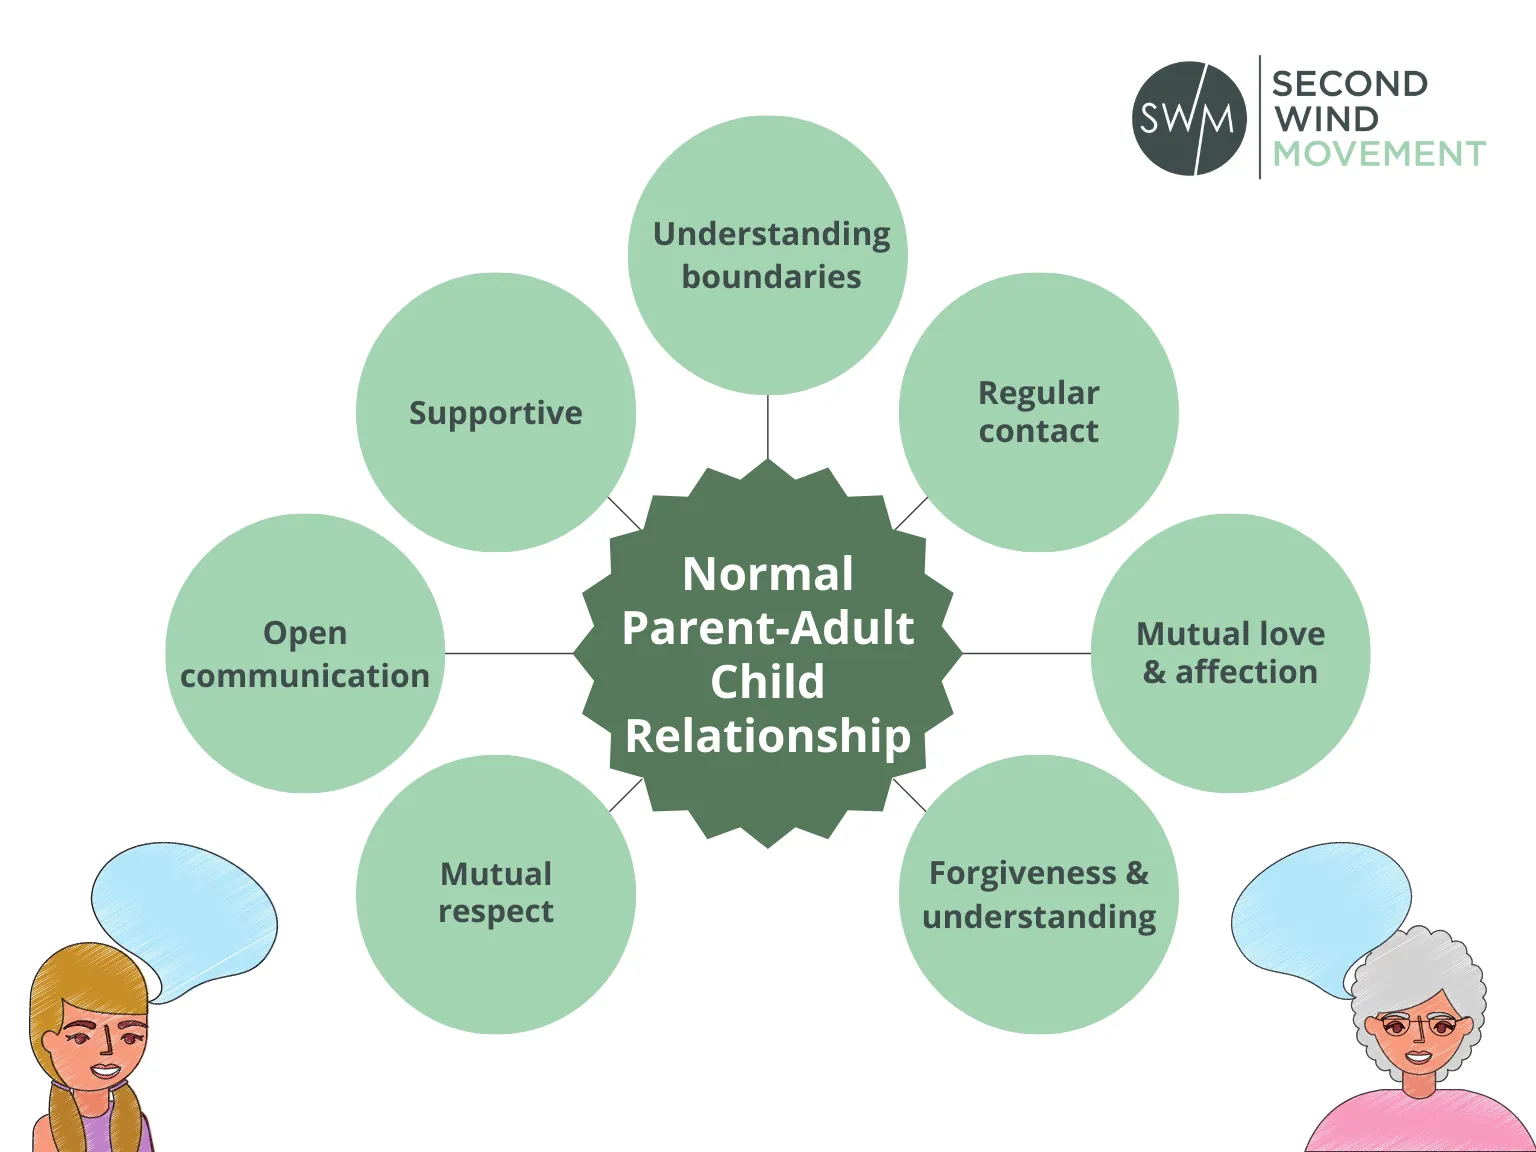 Normal parent - adult child relationship is: mutual respect, open communication, supportive, understanding boundaries, regular contact, mutual love and affection, and forgiveness and understading